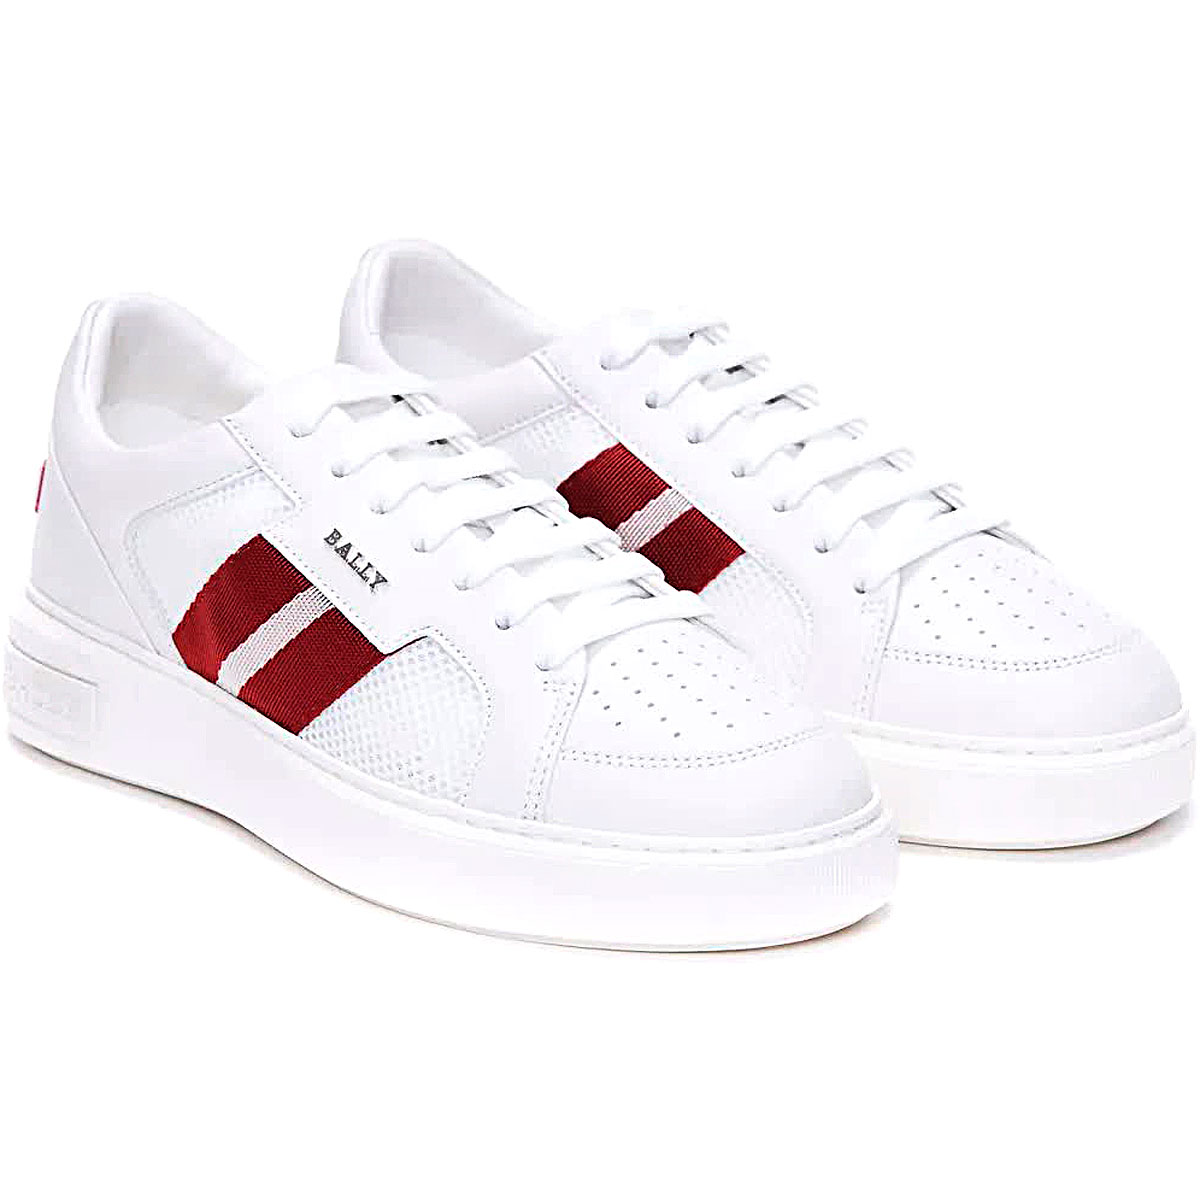 Buy Authentic Bally Sneakers Online In India | Tata CLiQ Luxury